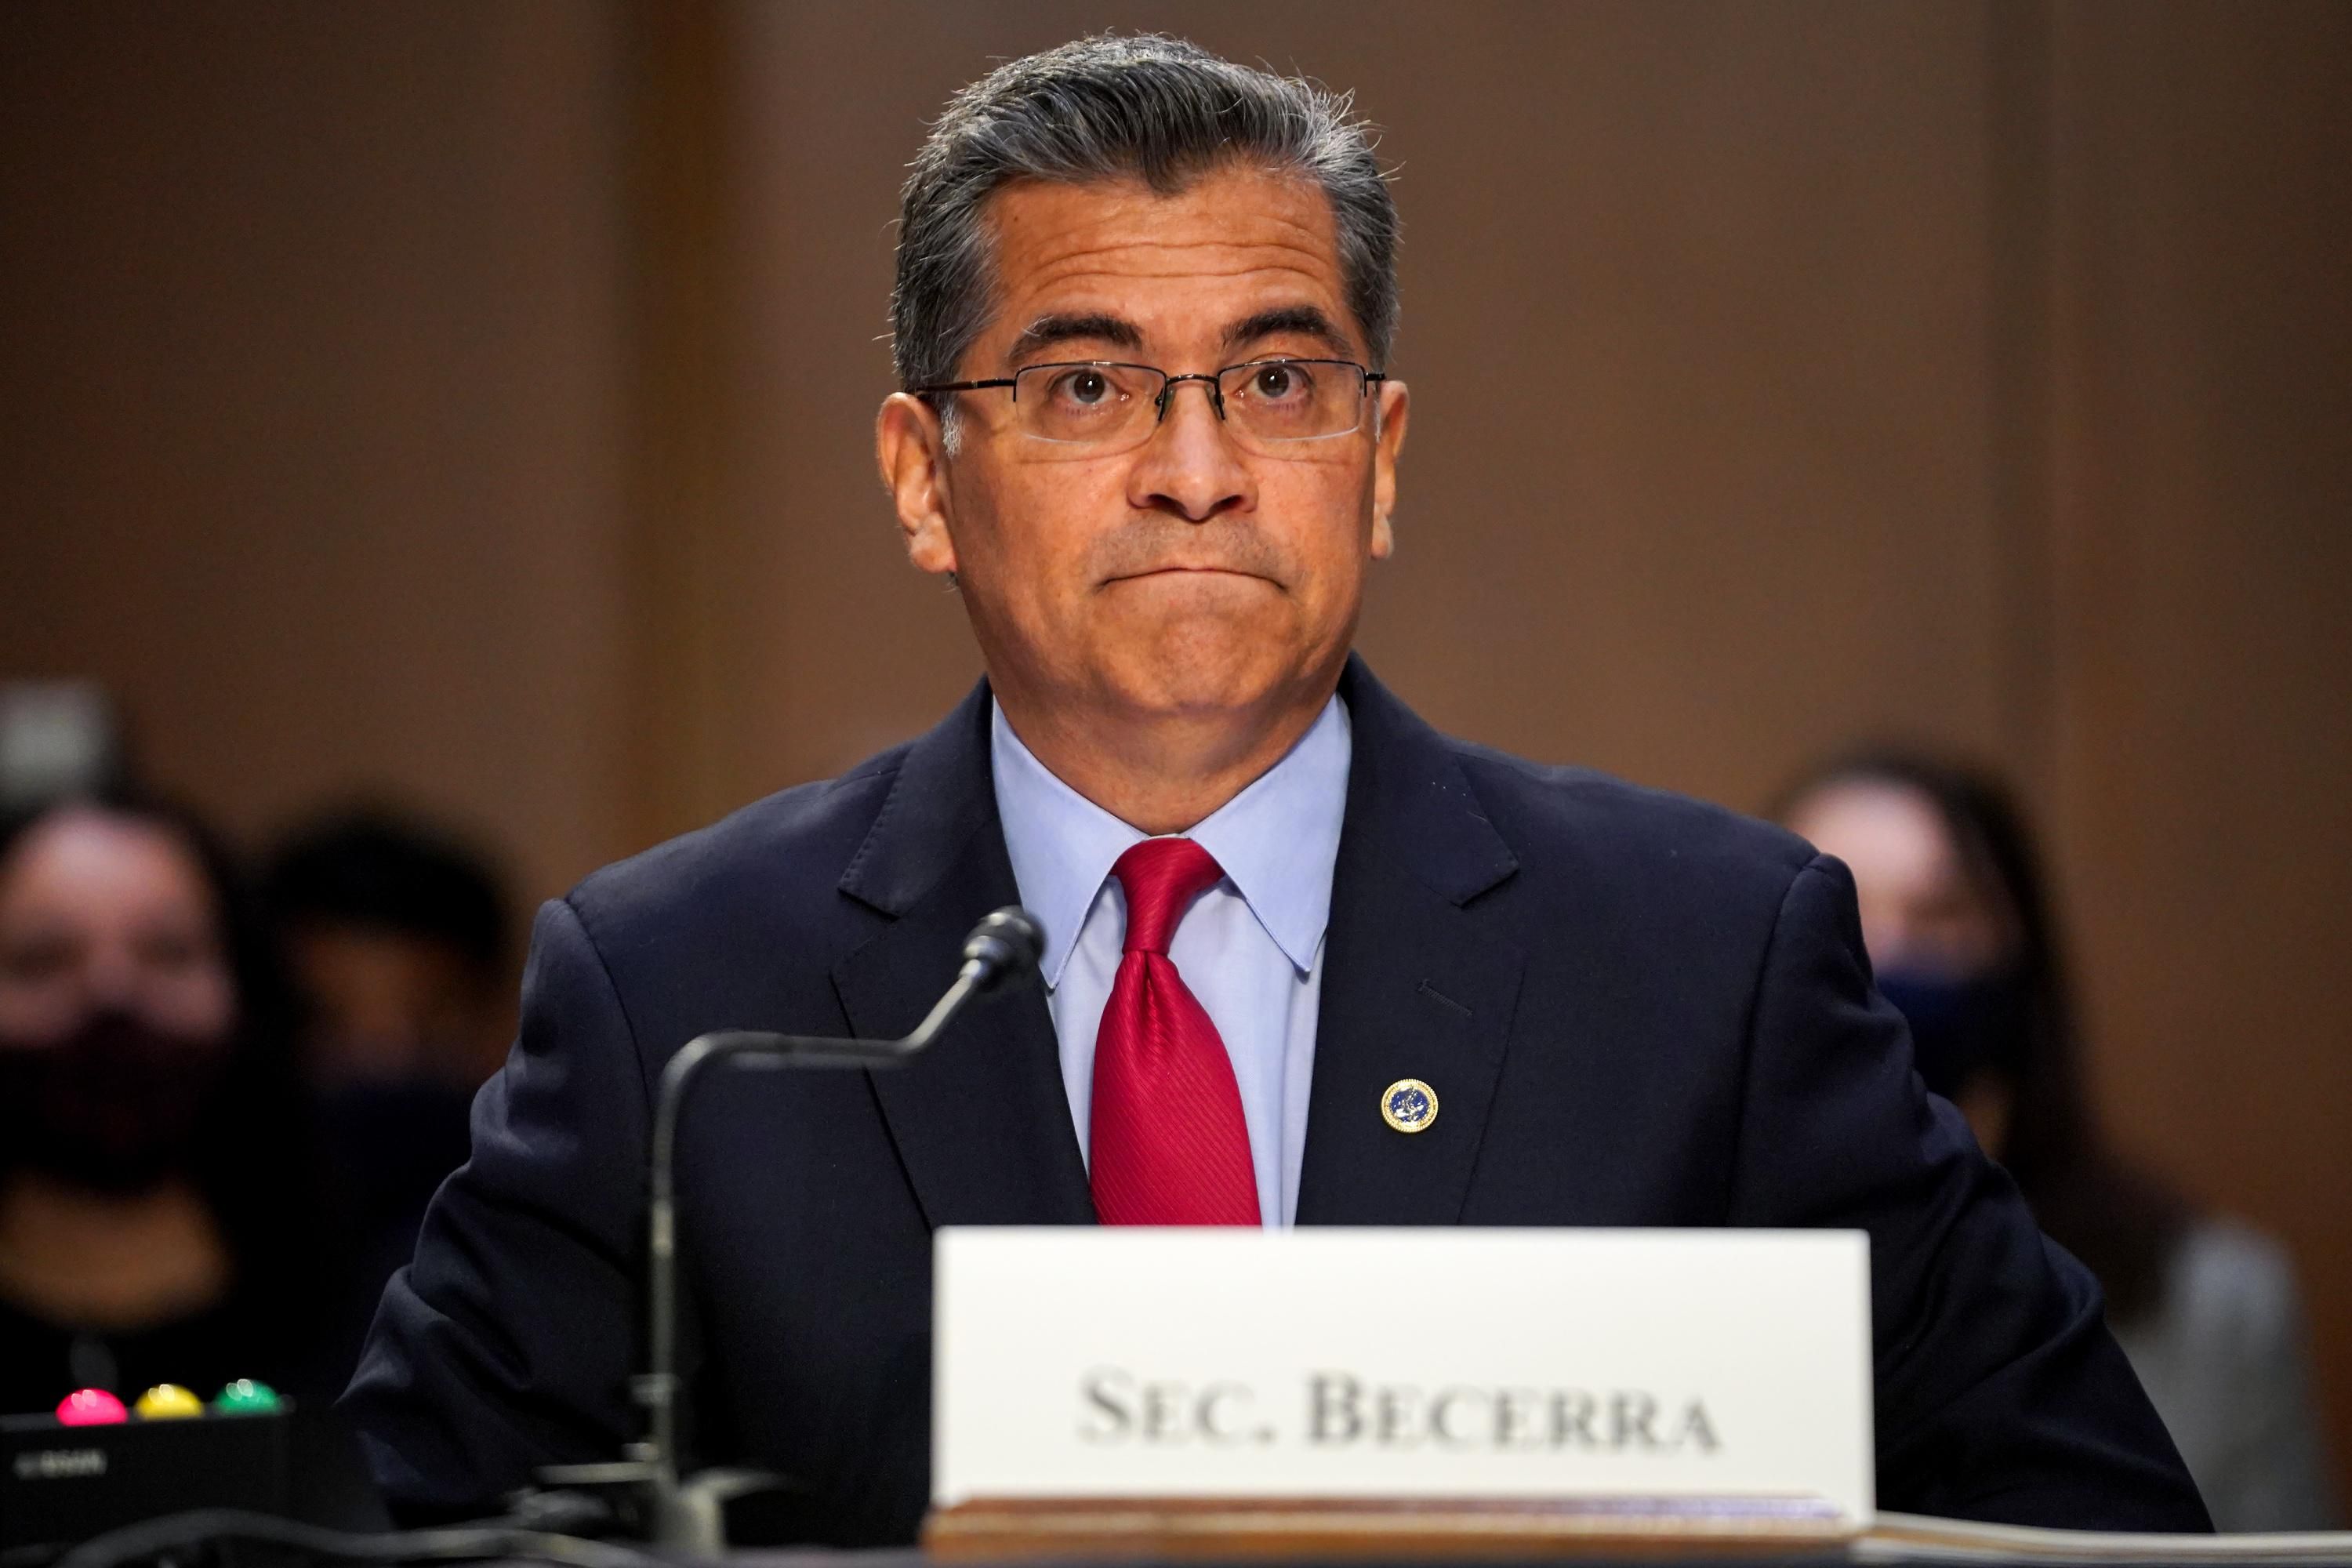 Health and Human Services Secretary Xavier Becerra speaks at a hearing